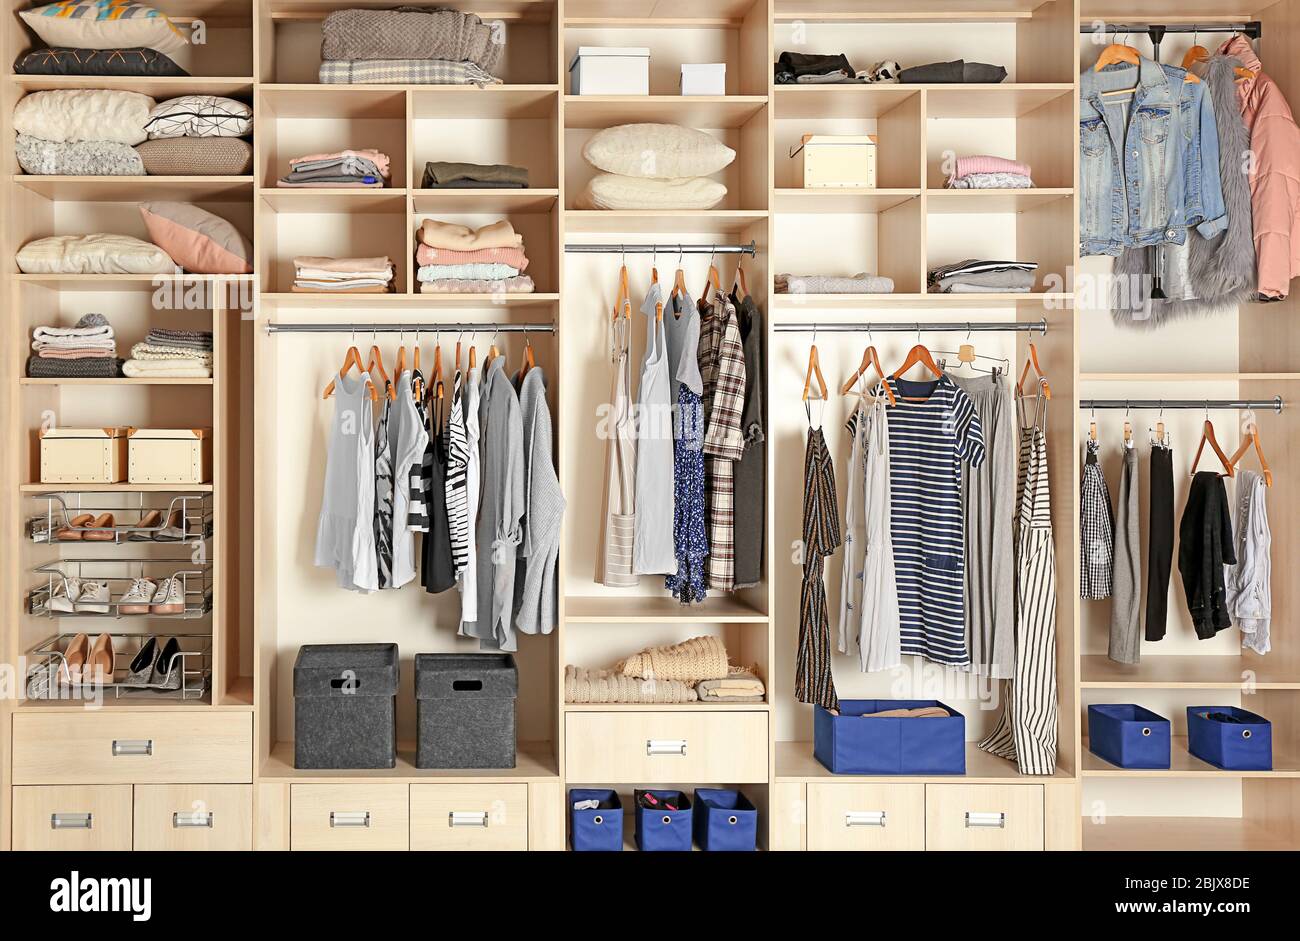 Large wardrobe closet with different clothes, shoes and home stuff Stock  Photo - Alamy